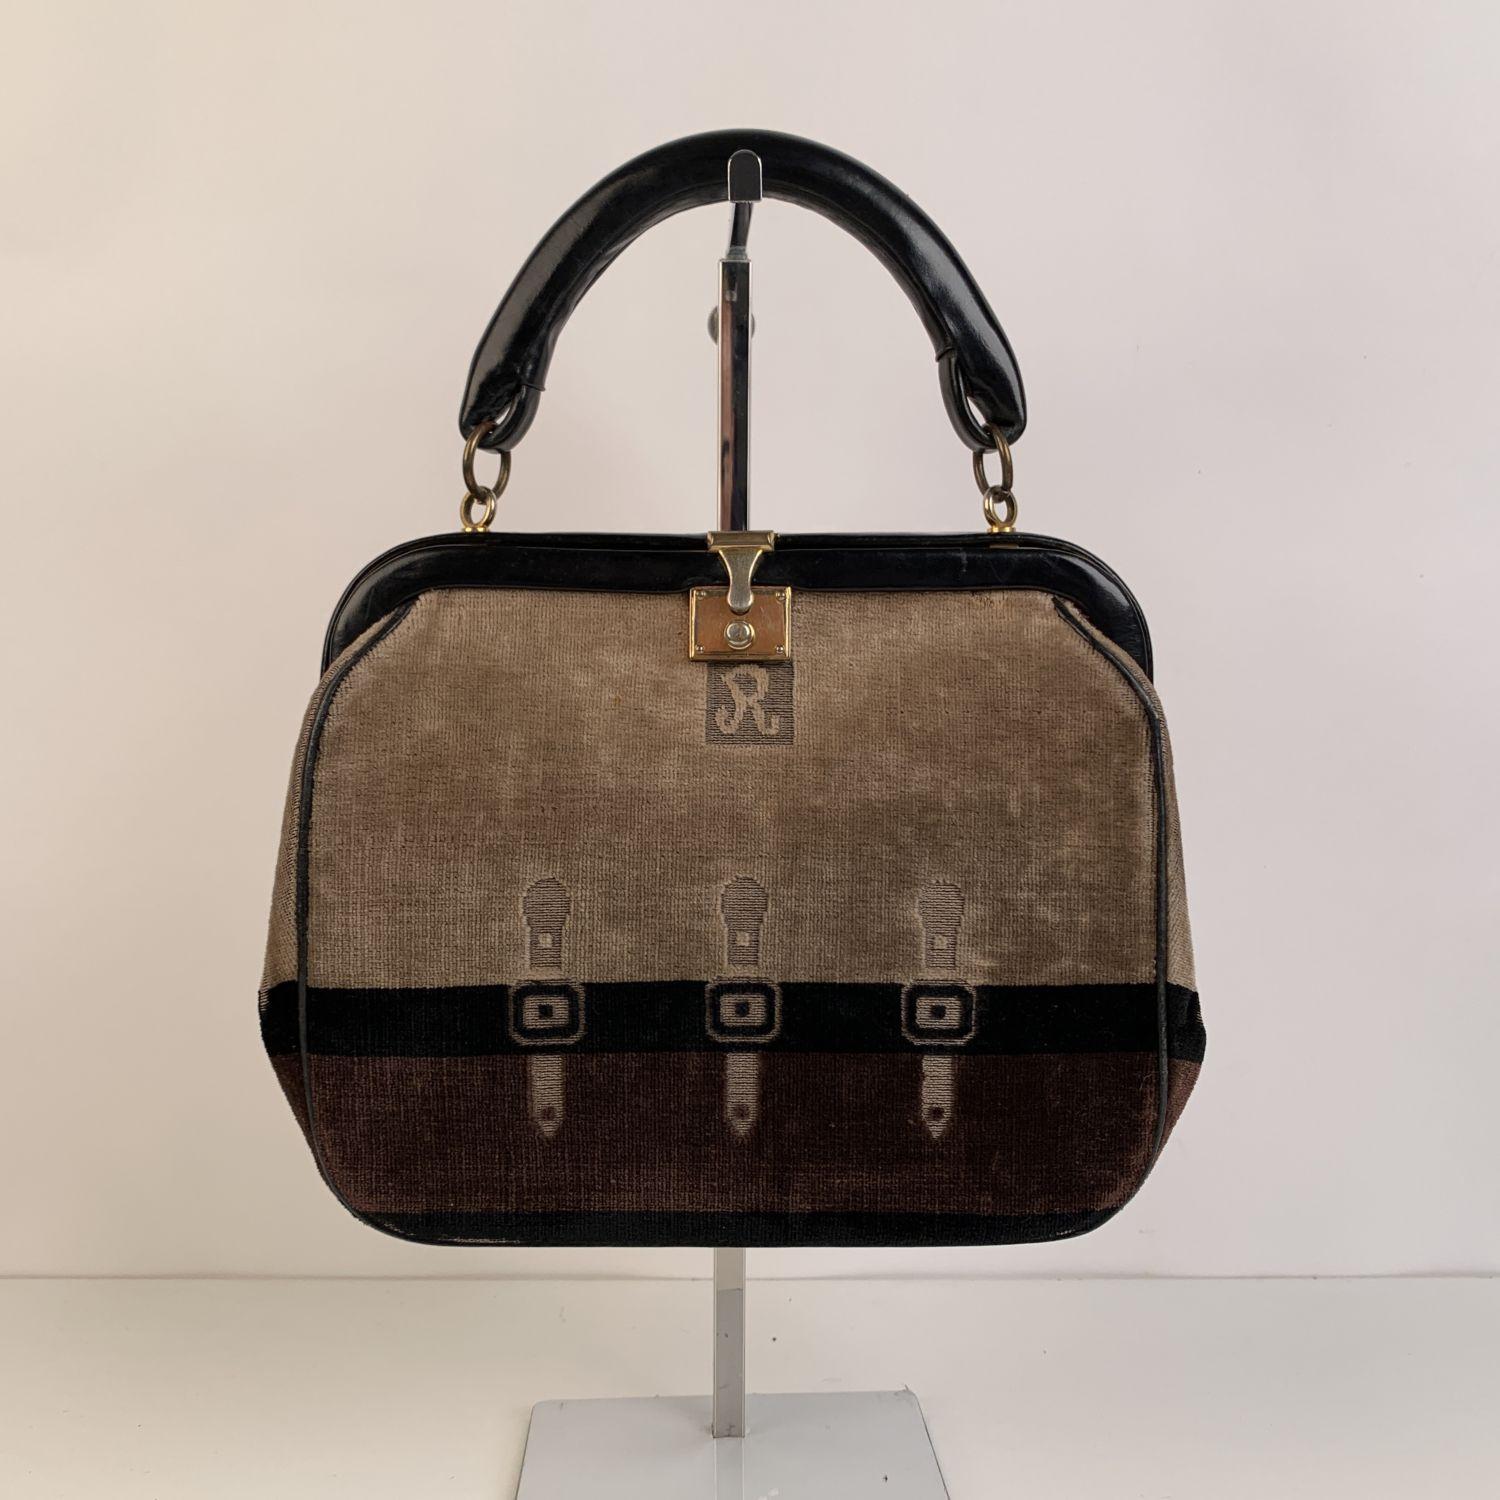 ROBERTA DI CAMERINO velvet handbag. Classic style in brown, black and beige velvet with cut out buckle design on the front and on the back. Gold metal hardware. It features a leather top-handle and a front clasp closure.Leather lining. 2 side open